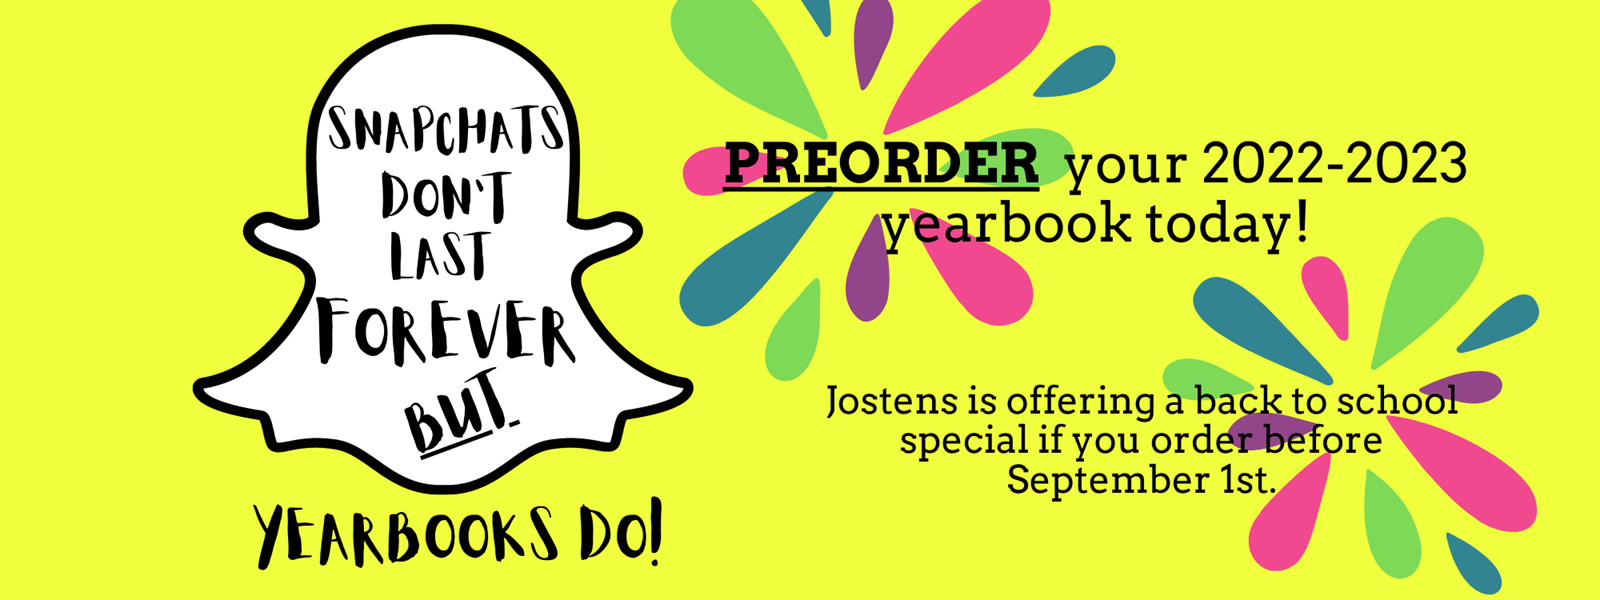 Yellow background with Snapchat symbol covered in the text &#34;Snapchats don&#39;t last forever but yearbooks do!&#34; Colored paint burst with the text &#34;Preorder you 2022-2023 yearbook today. Jostens is offering a back to school special if you order before September 1st.&#34; Text is black. 